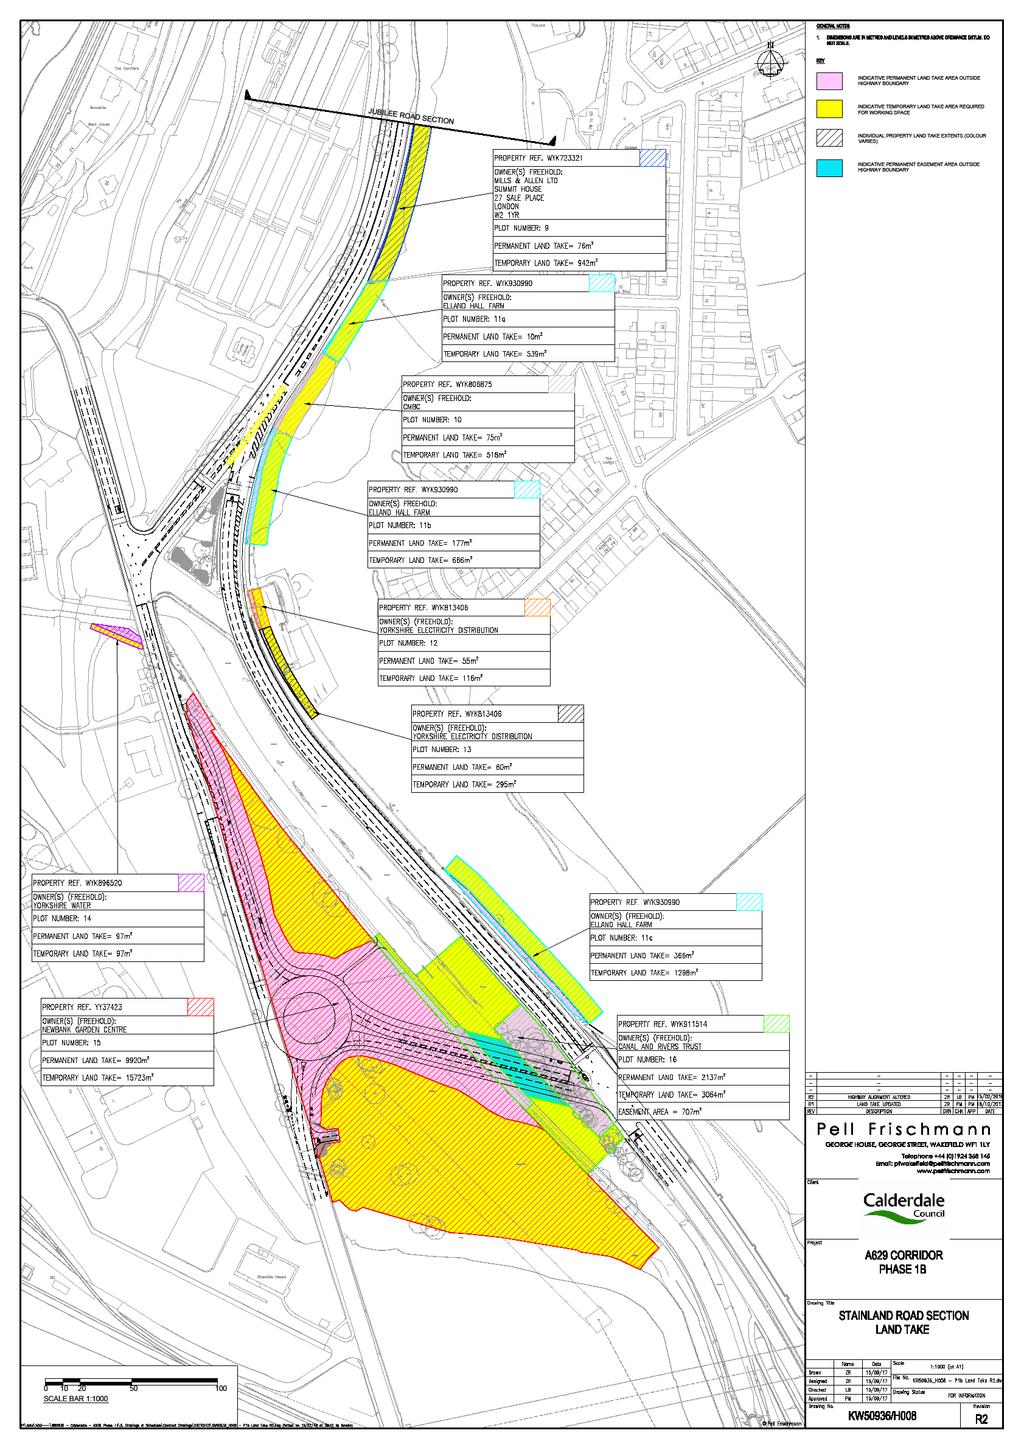 APPENDIX A Stainland Road Revised